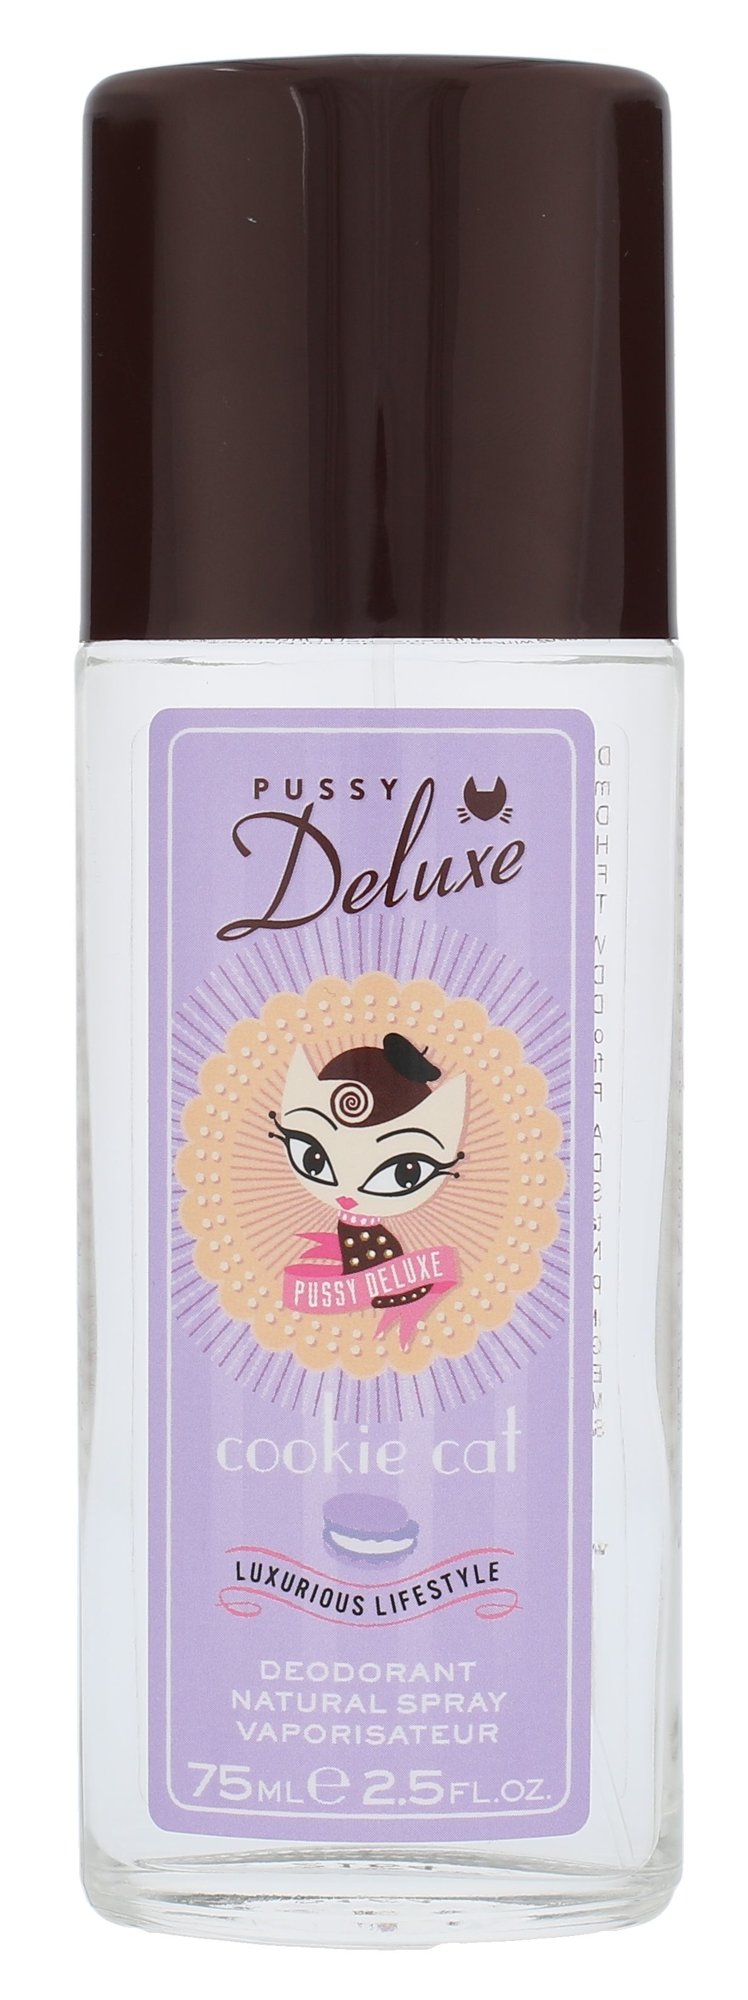 Pussy Deluxe Cookie Cat